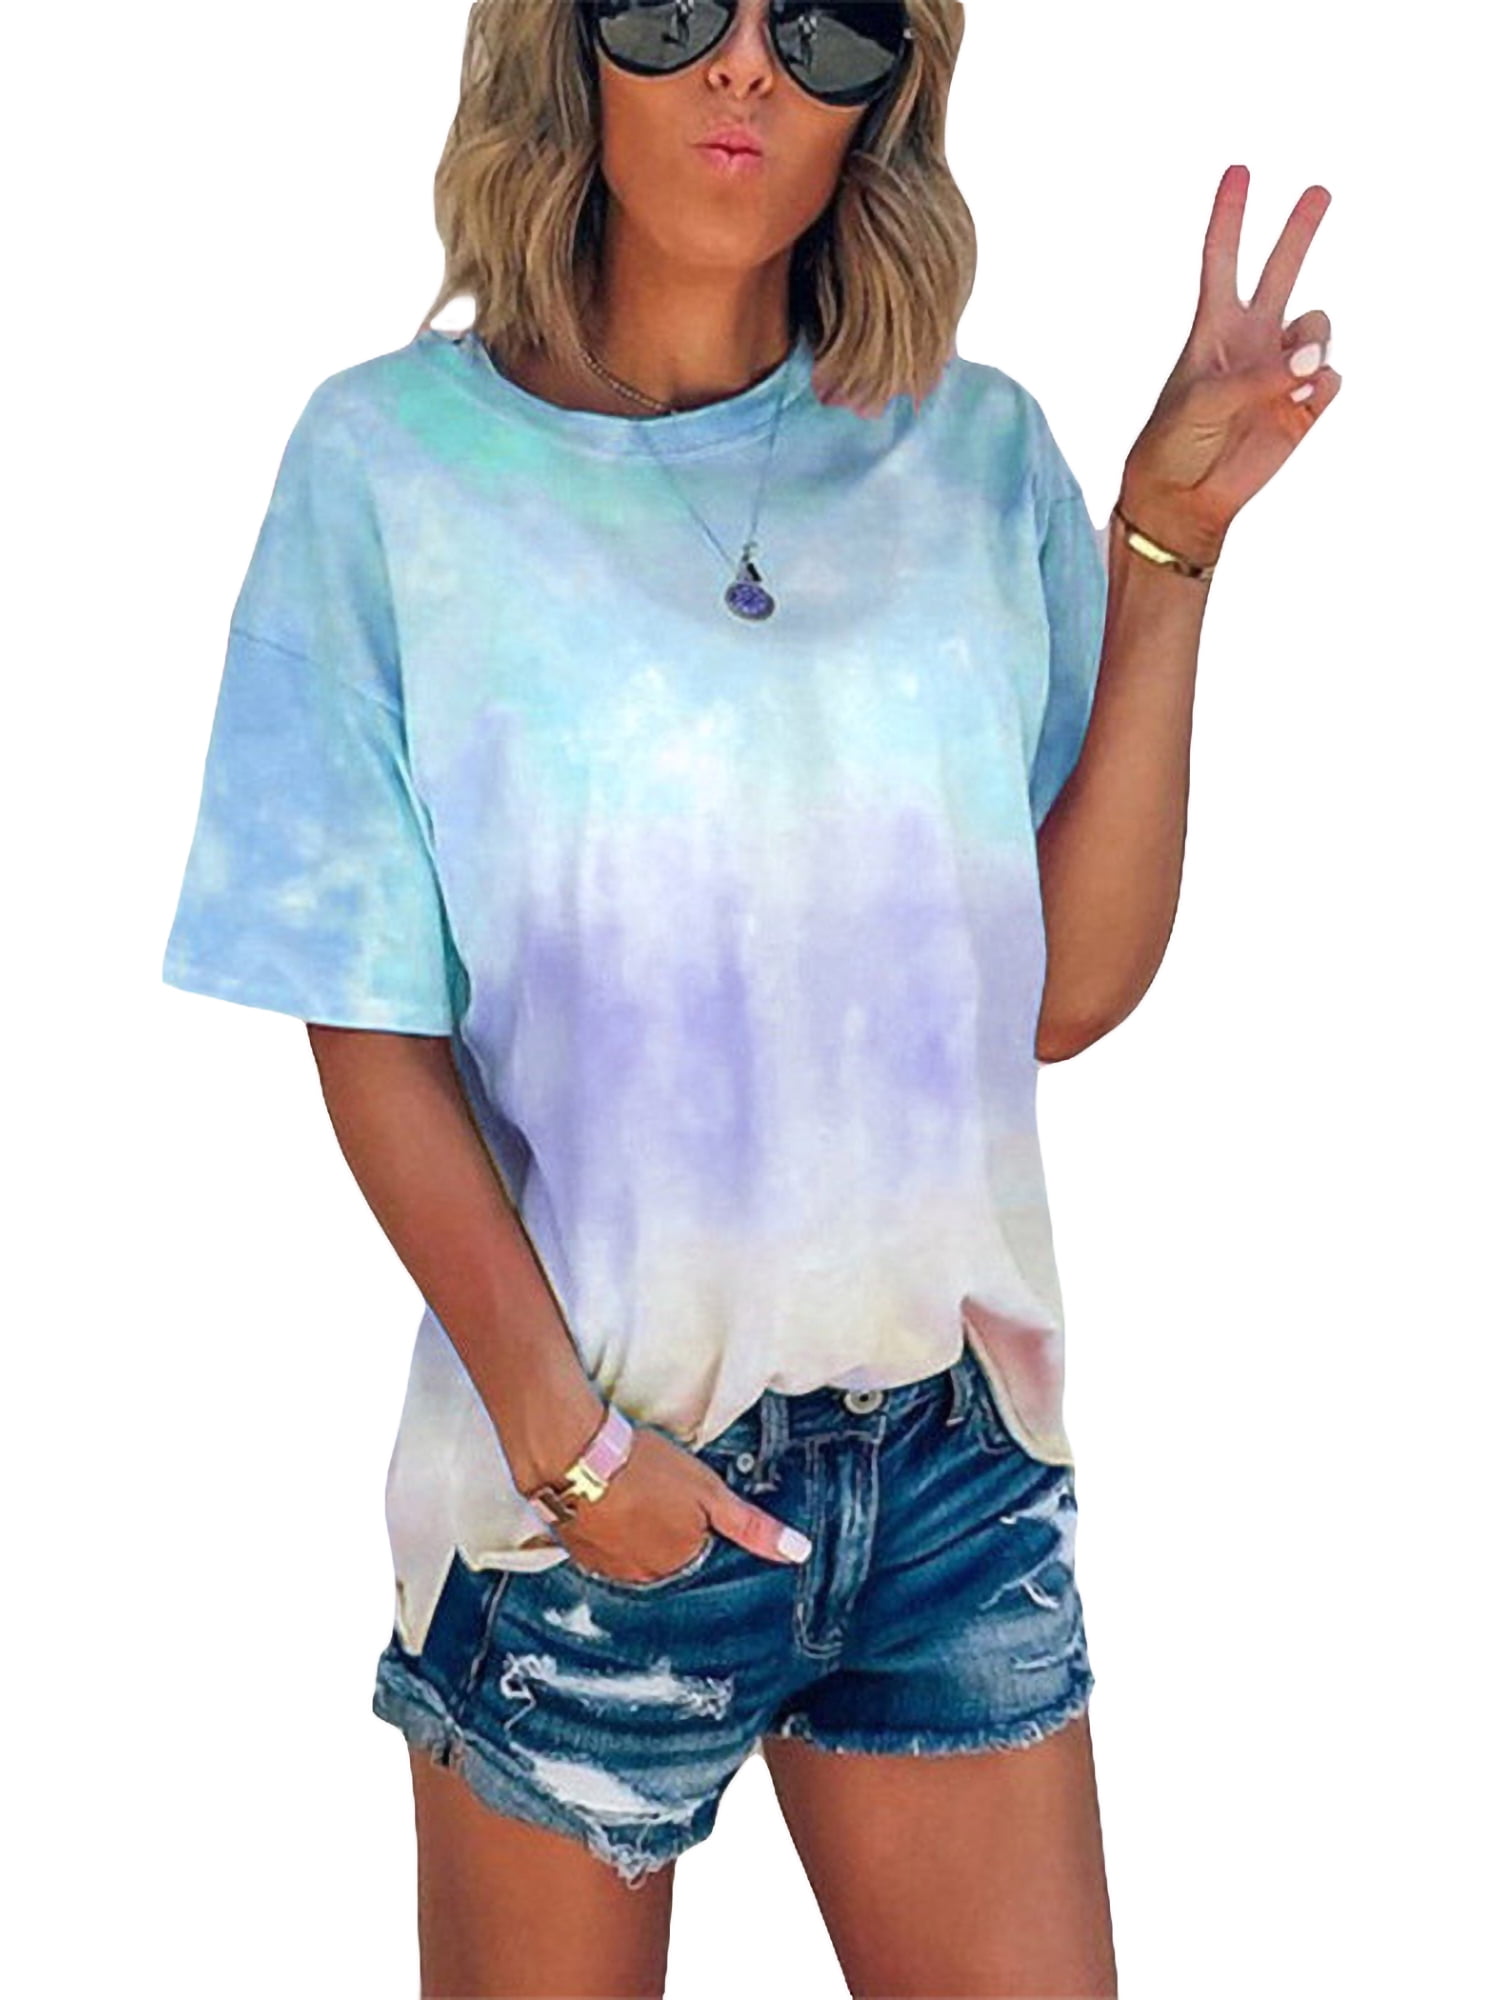 Round Neck Printed T Shirt for Womens Summer Short Sleeve Tops Loose Casual Tees Ladies Blouses 